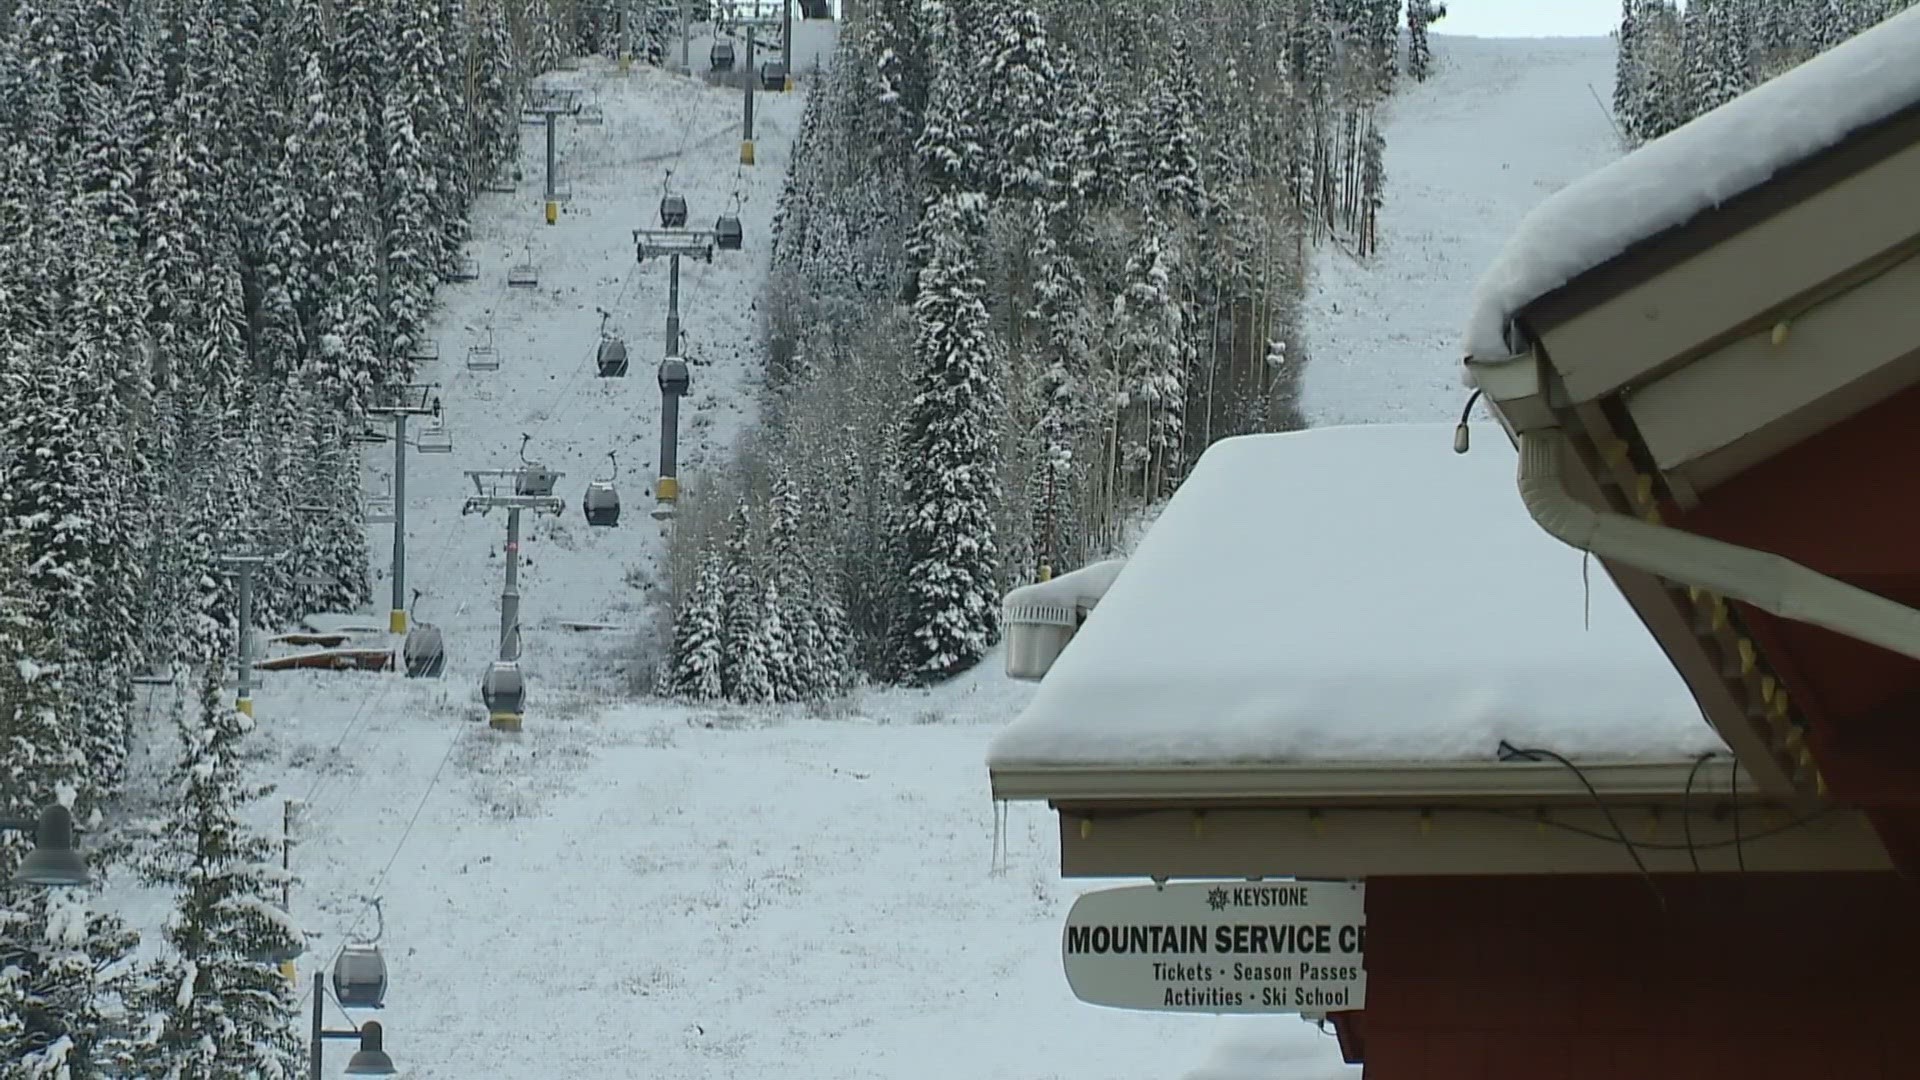 Keystone Resort announced its opening date Monday, after a winter storm dumped more than a foot of new snow.